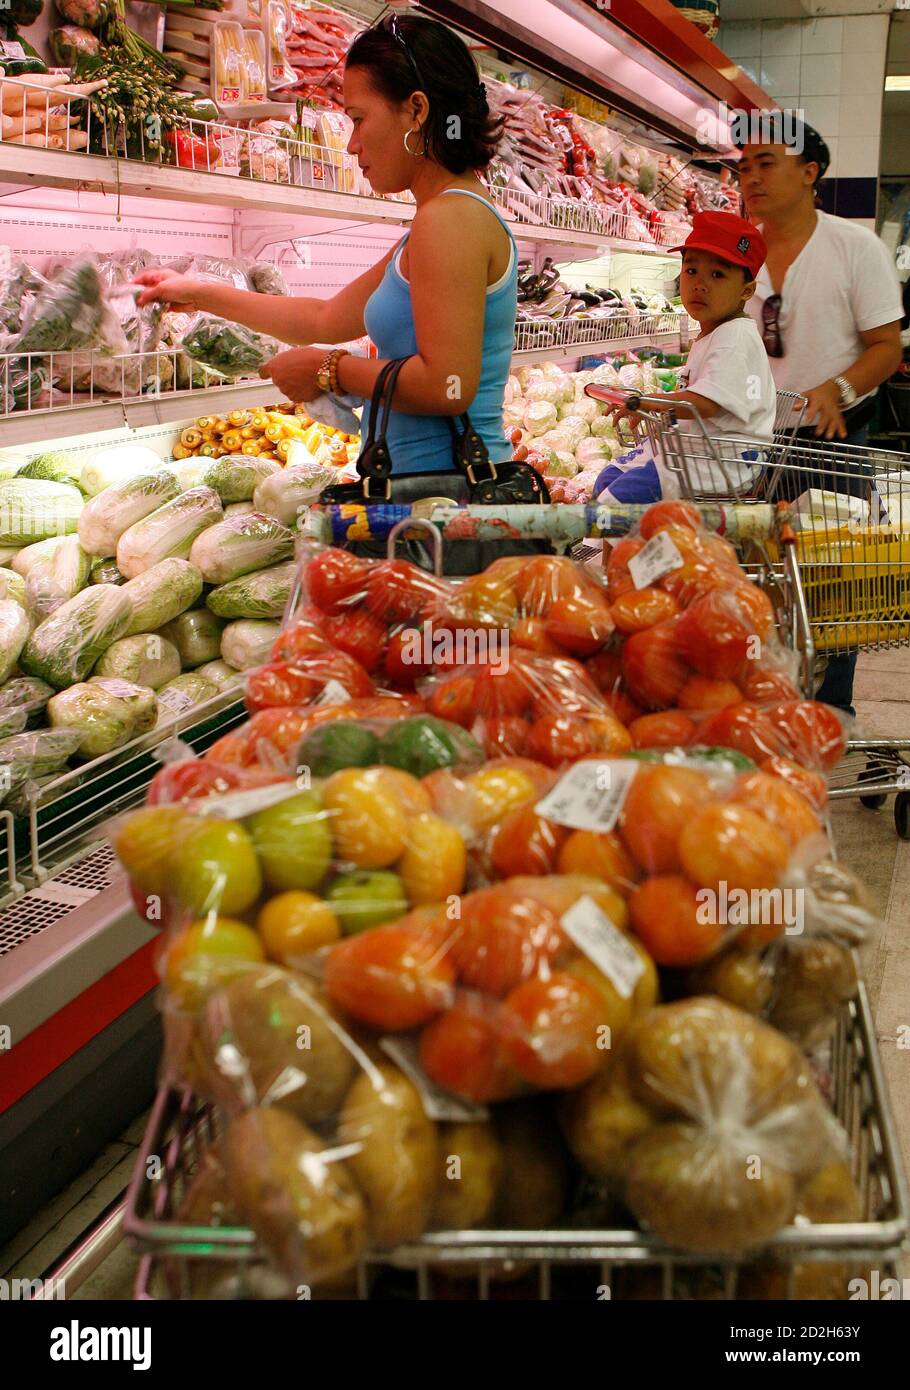 A family shops at a supermarket inside a shopping mall in Manila's Makati  financial district September 22, 2008. Shopping malls and radio stations in  the Philippines have started playing Christmas carols, heralding